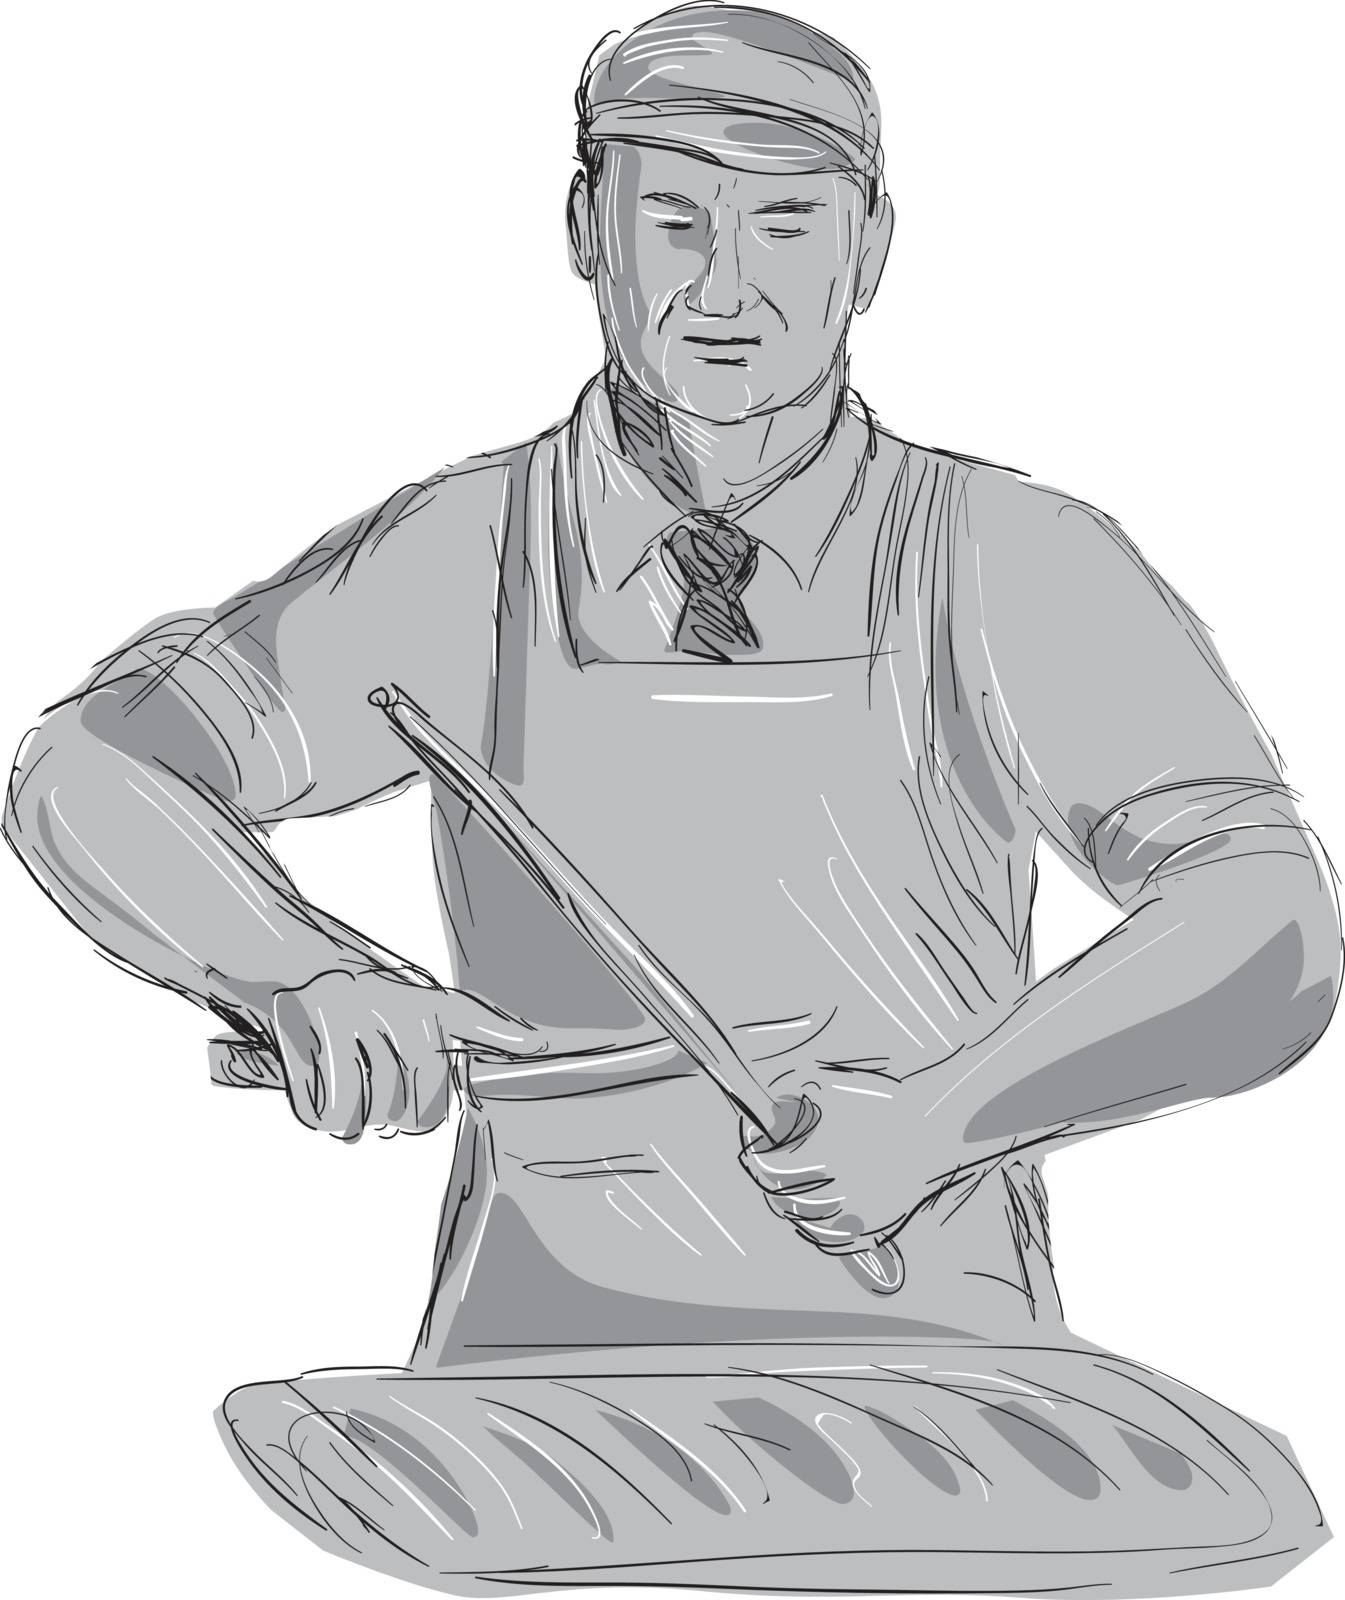 Illustration of a Vintage Butcher Sharpen Knife with cut of meat viewed from front done hand sketch Drawing style.